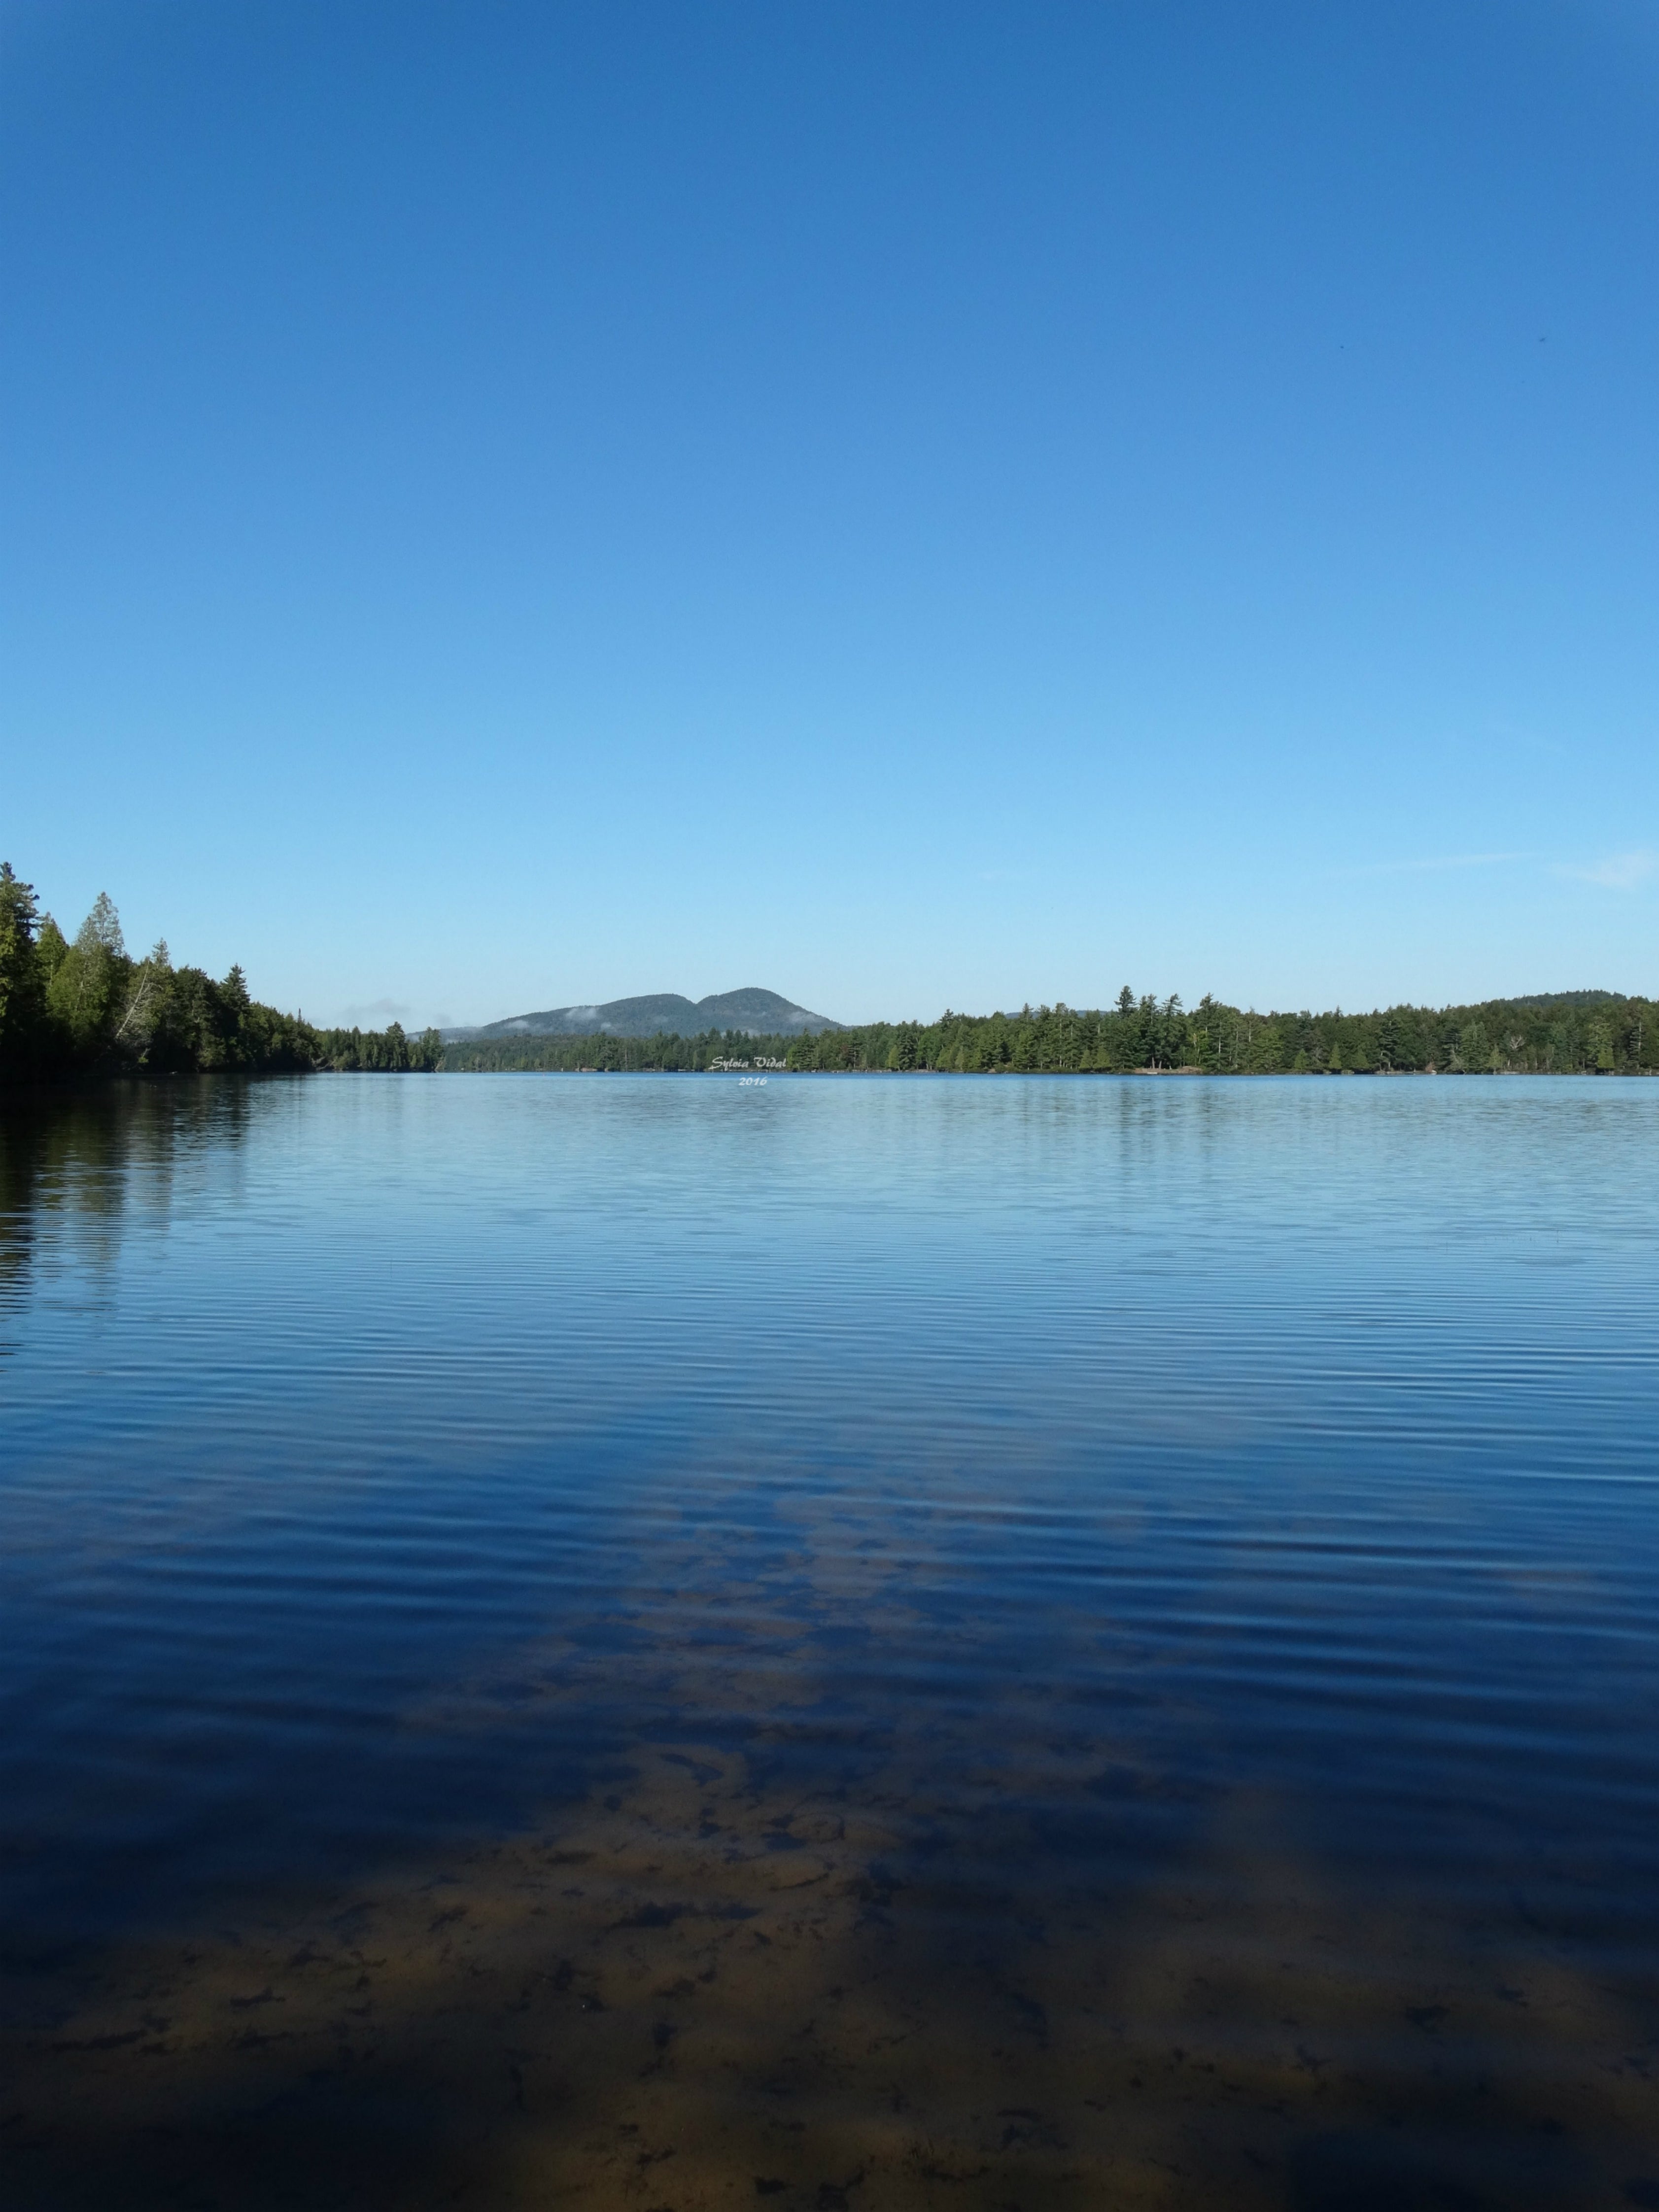 Camper submitted image from Forked Lake Adirondack Preserve - 3